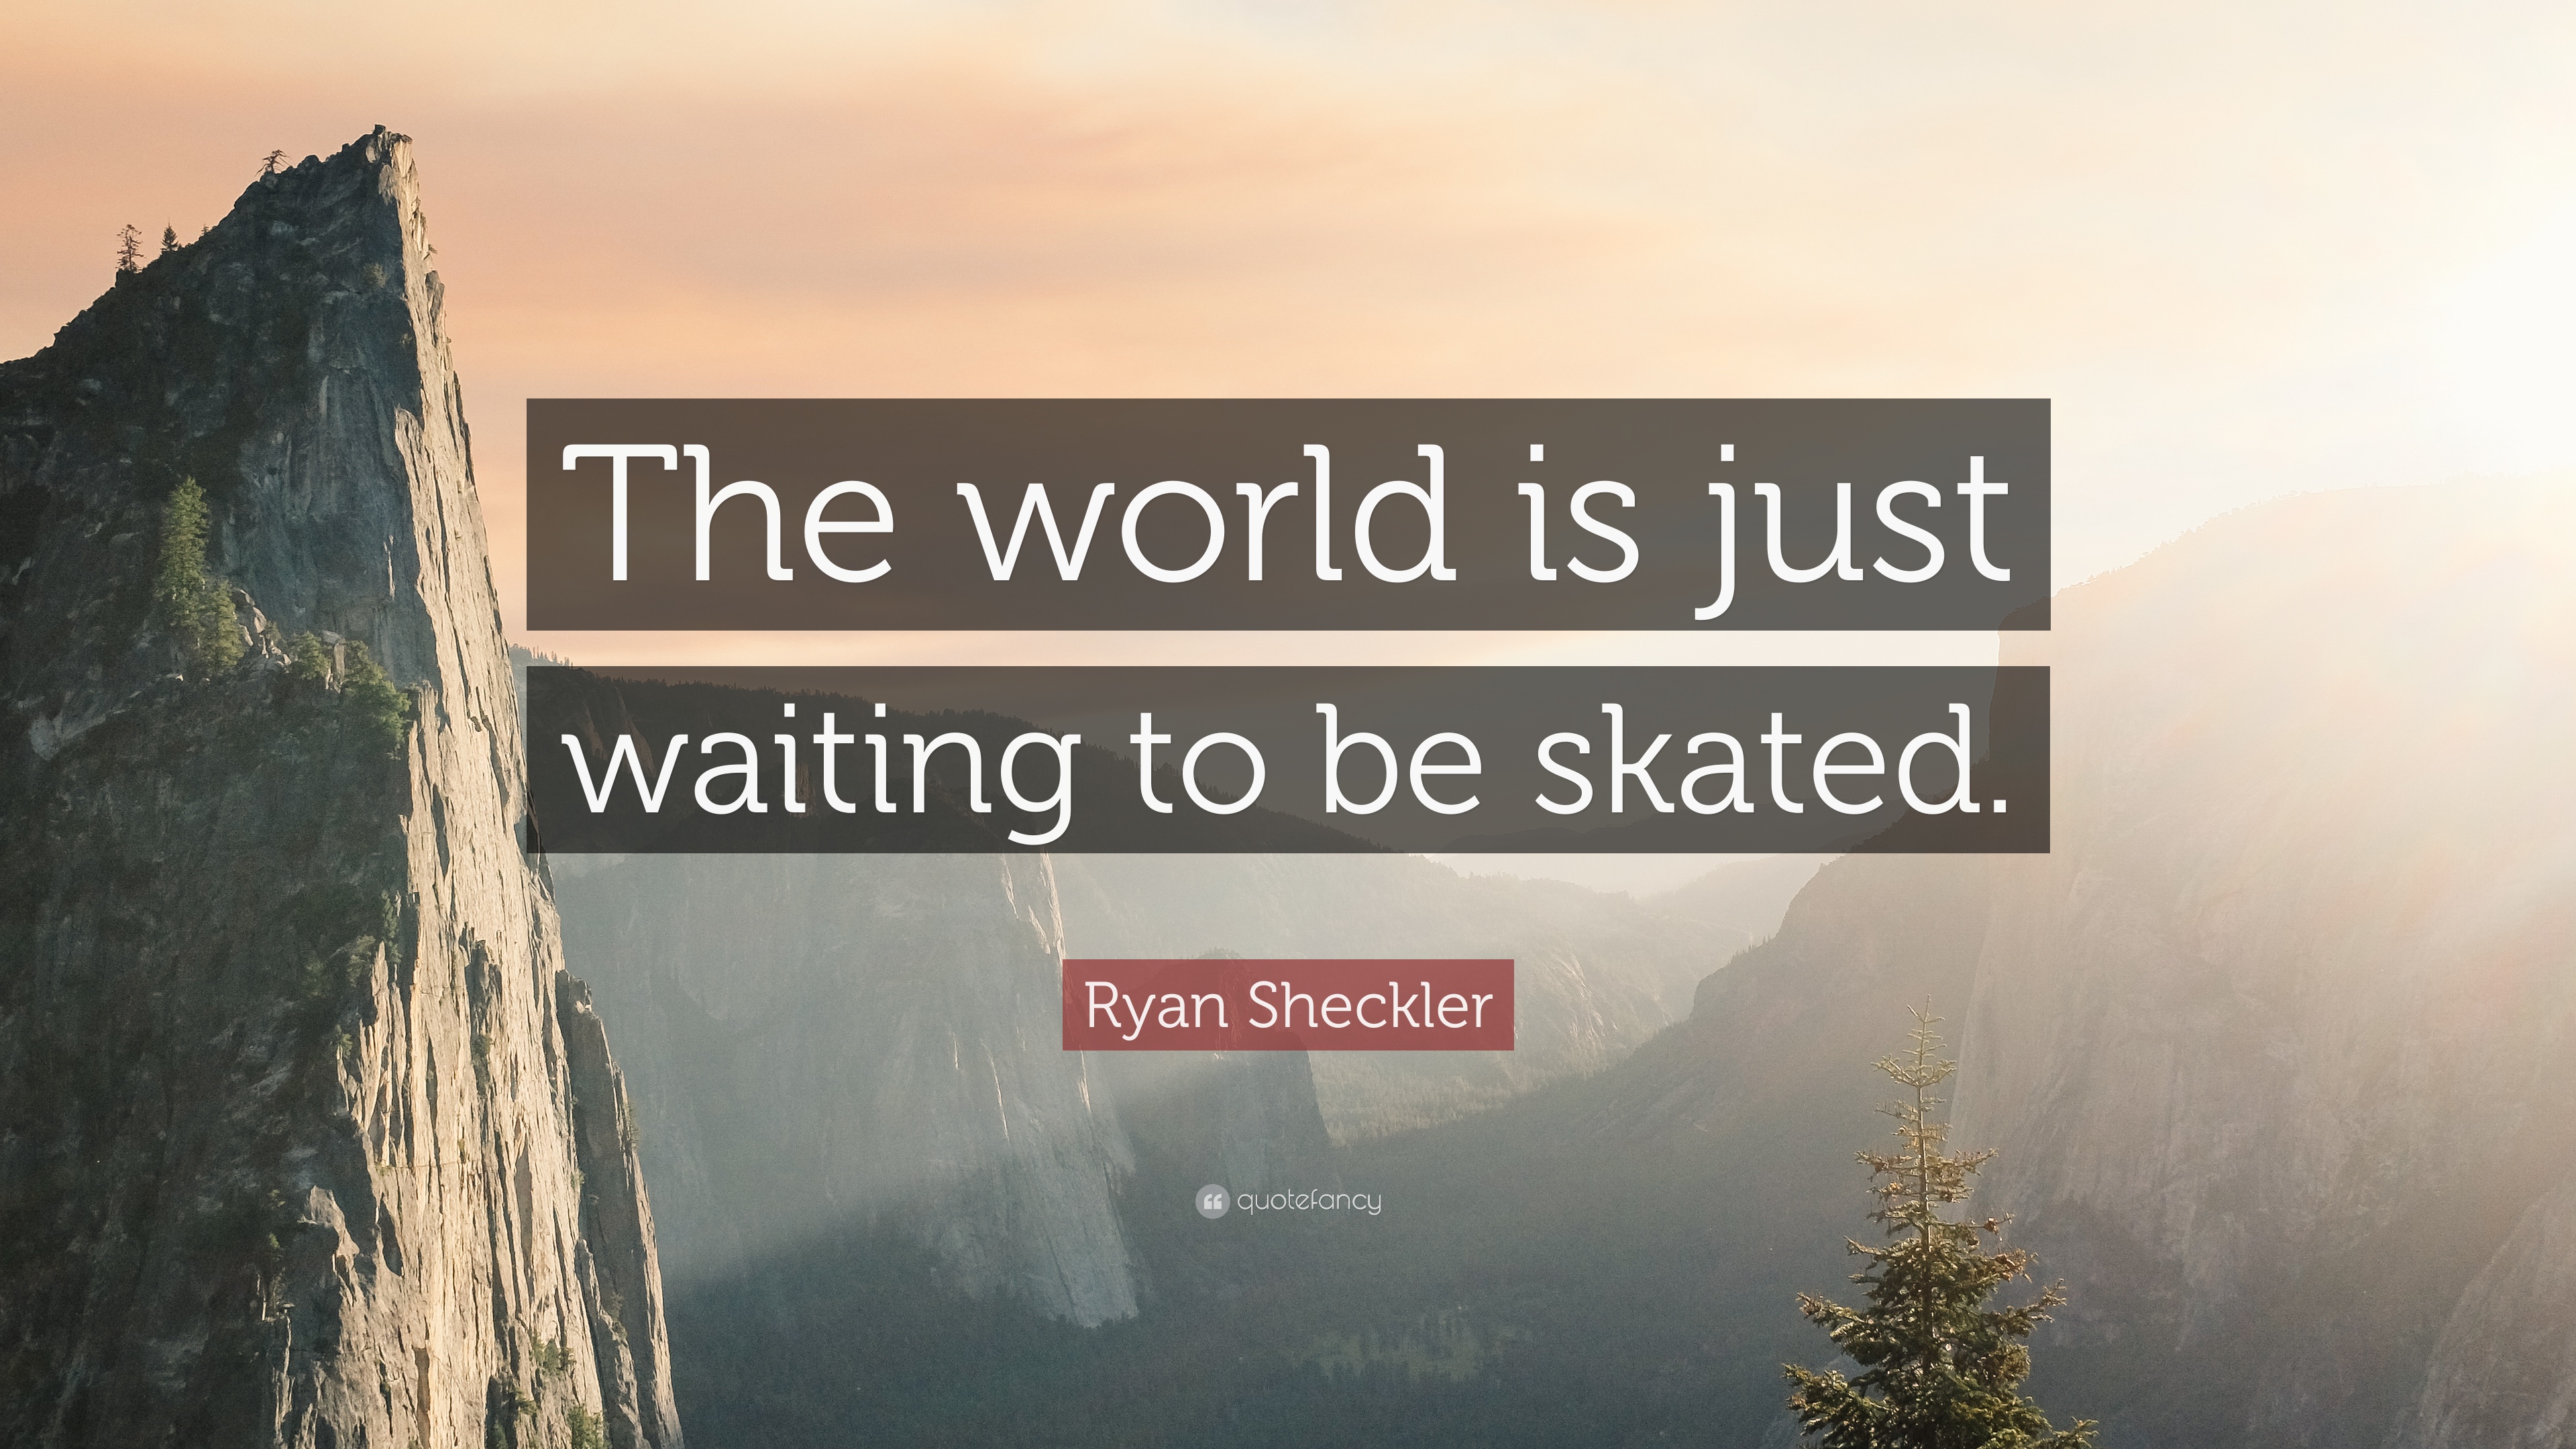 Ryan Sheckler Quote: “The world is just waiting to be skated.” (7 ...